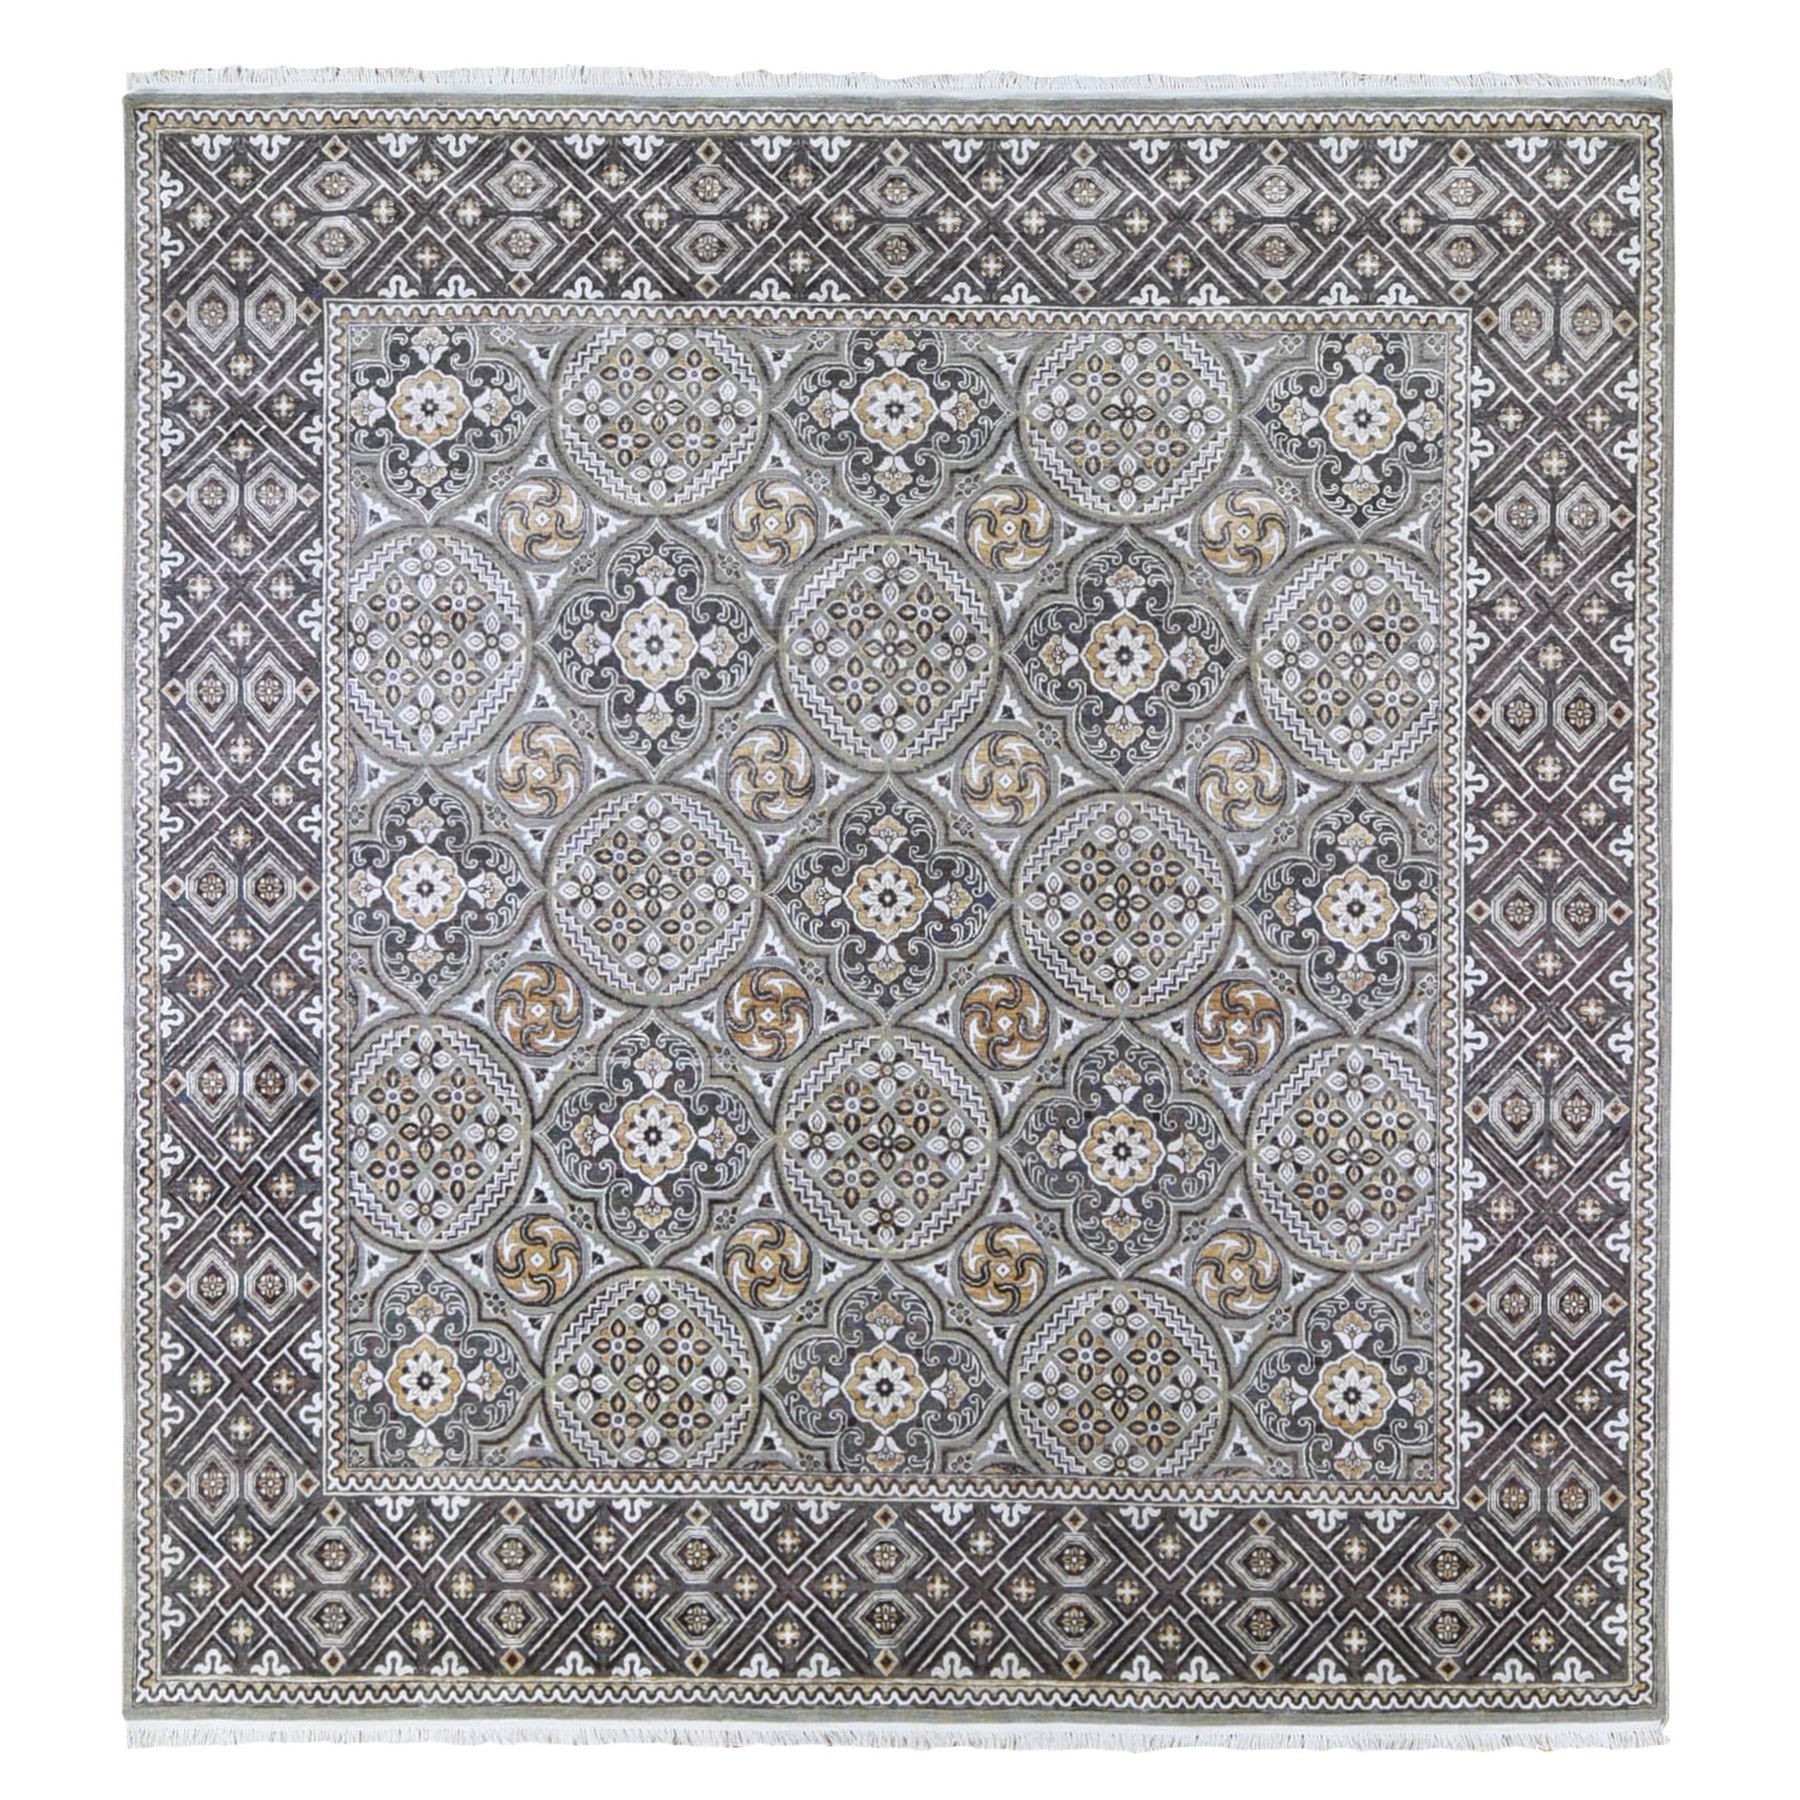 10'x10' Textured Wool and Silk Square Mughal Inspired Medallions Design Hand Woven Brown and Gray Oriental Rug 